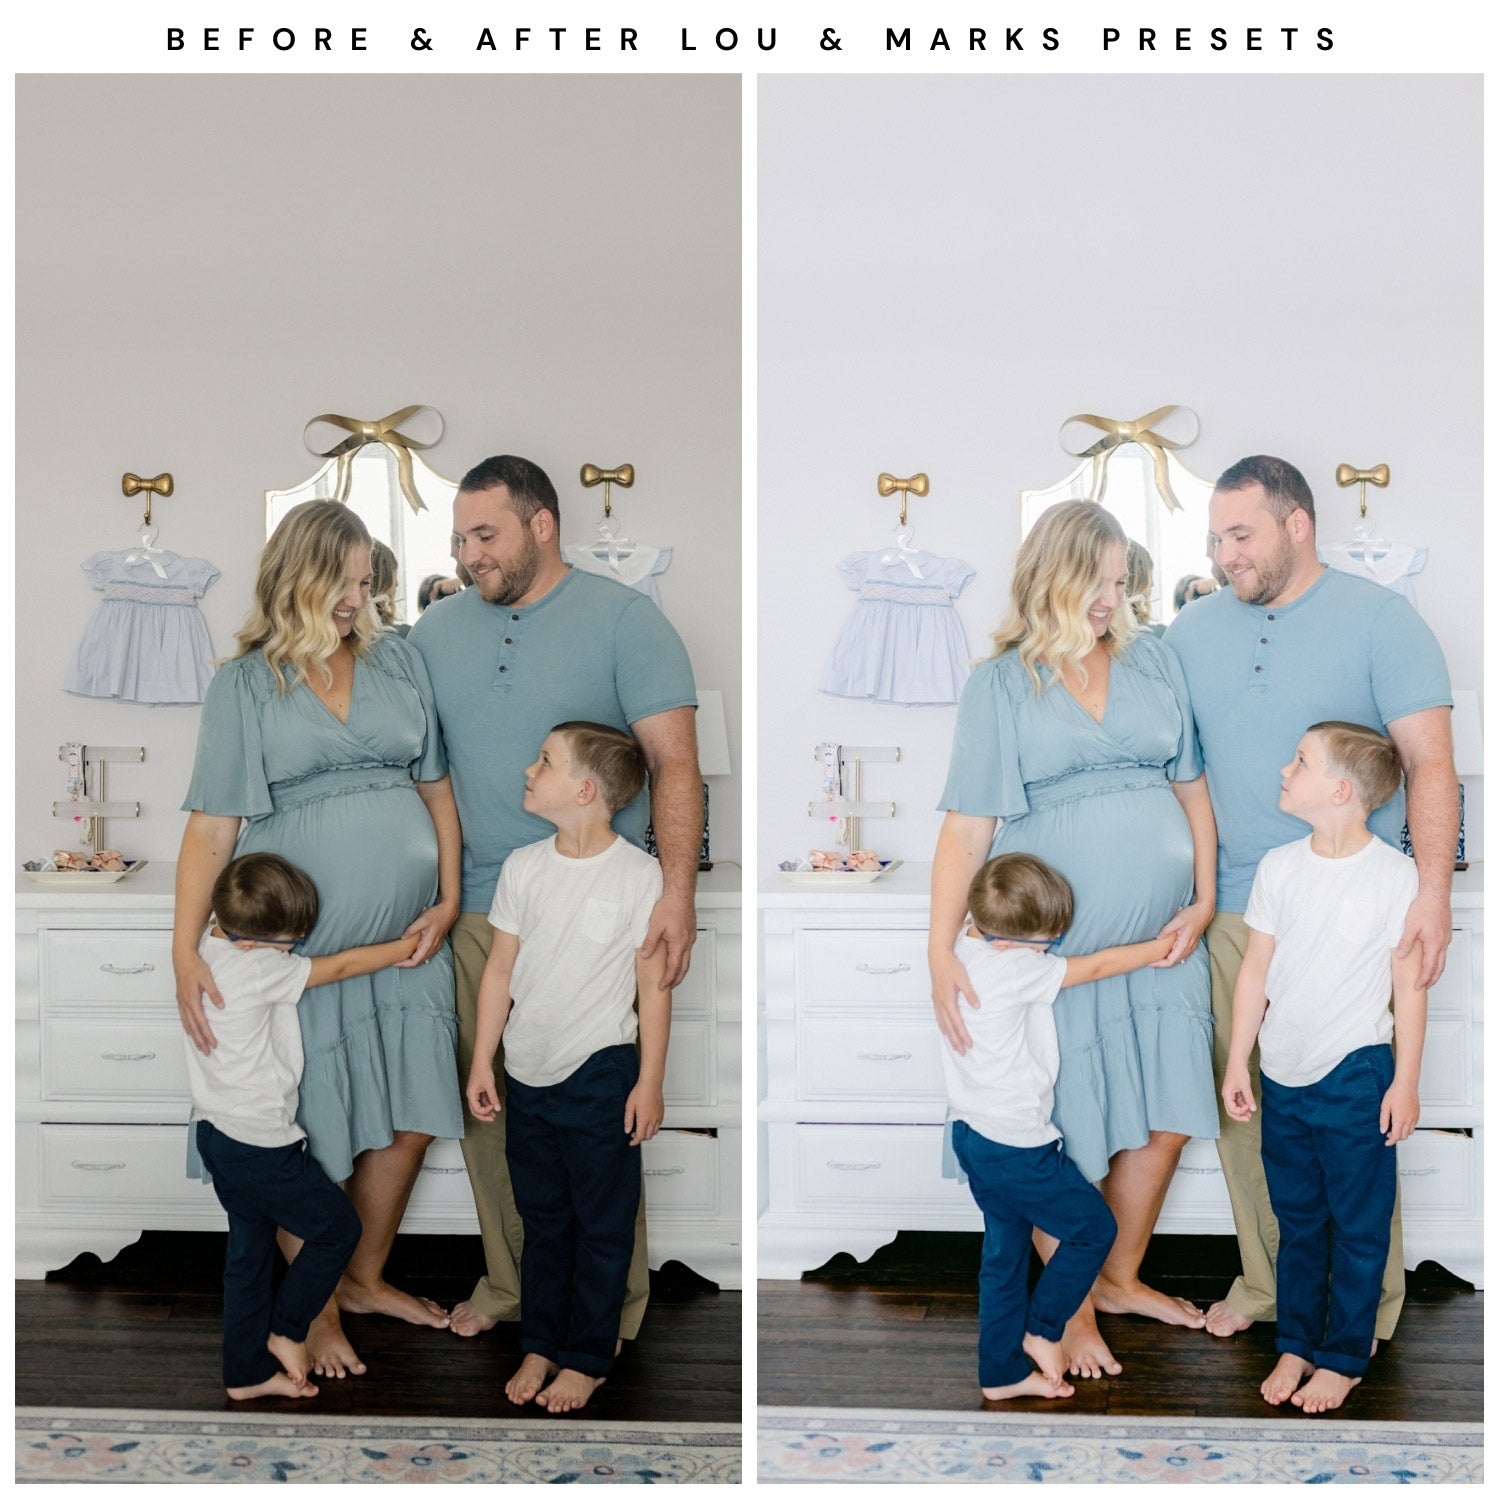 Lou & Marks Presets Light And Airy Lightroom Presets Bundle The Best Presets Indoor Photos